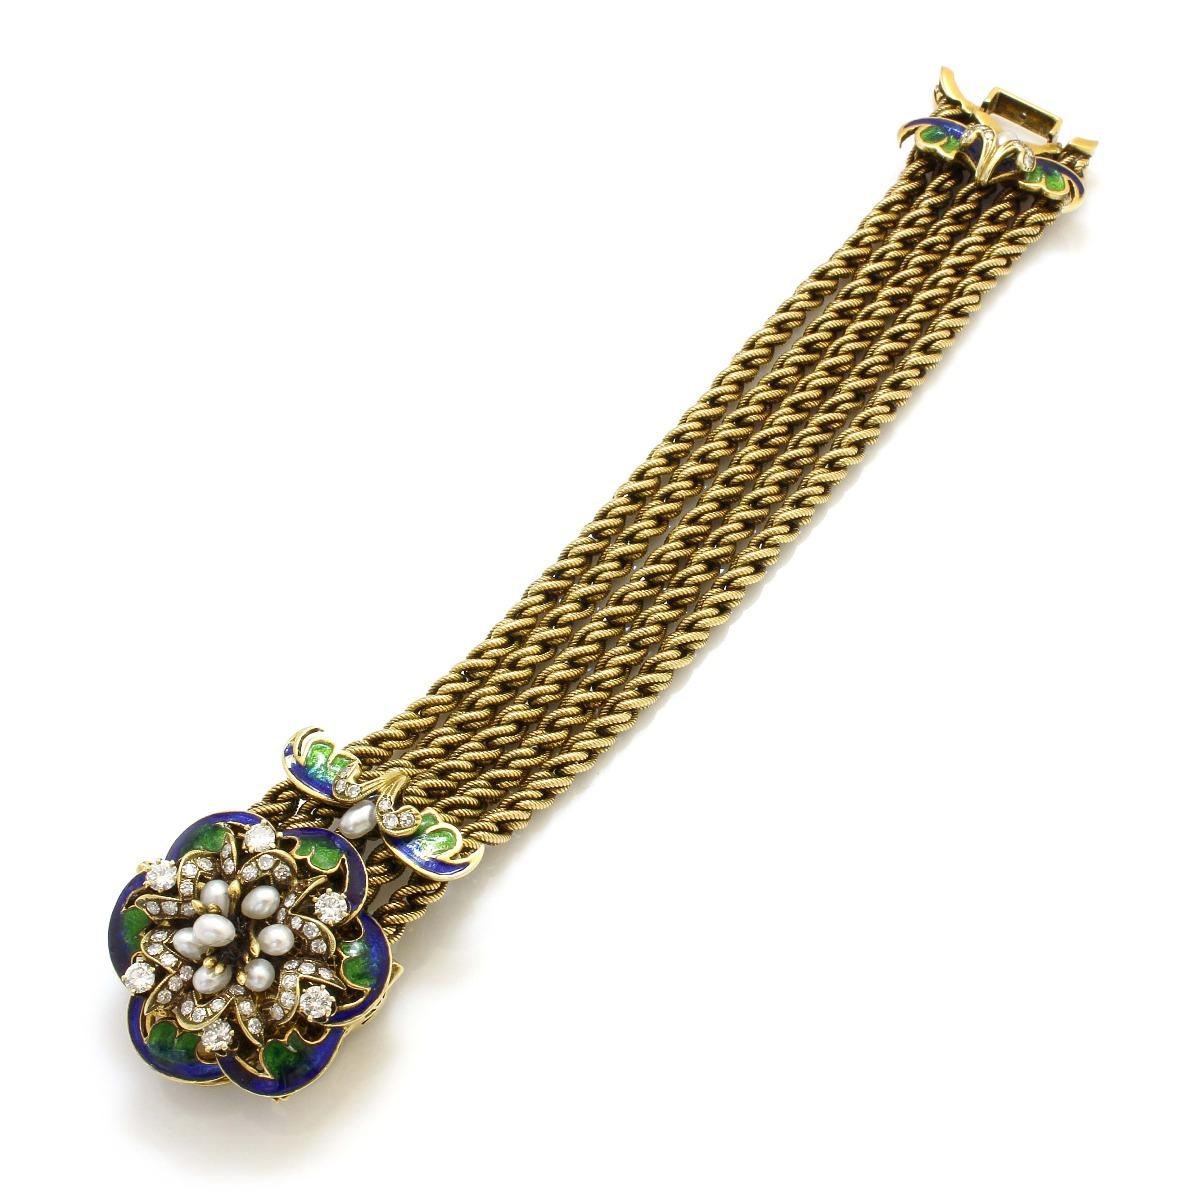 14K Yellow Gold Enameled Diamond and Pearl Antique Floral Bracelet
Metal: 14 K Yellow Gold
Length: 6.5 Inches
Width: 1 Inch
Gram Weight: 83.9 Grams
Diamond Cut: Round
Diamond Clarity: VS1-VS2
Diamond Color: H-I
Diamond Weight: 1.5 CT
Gemstone Cut: